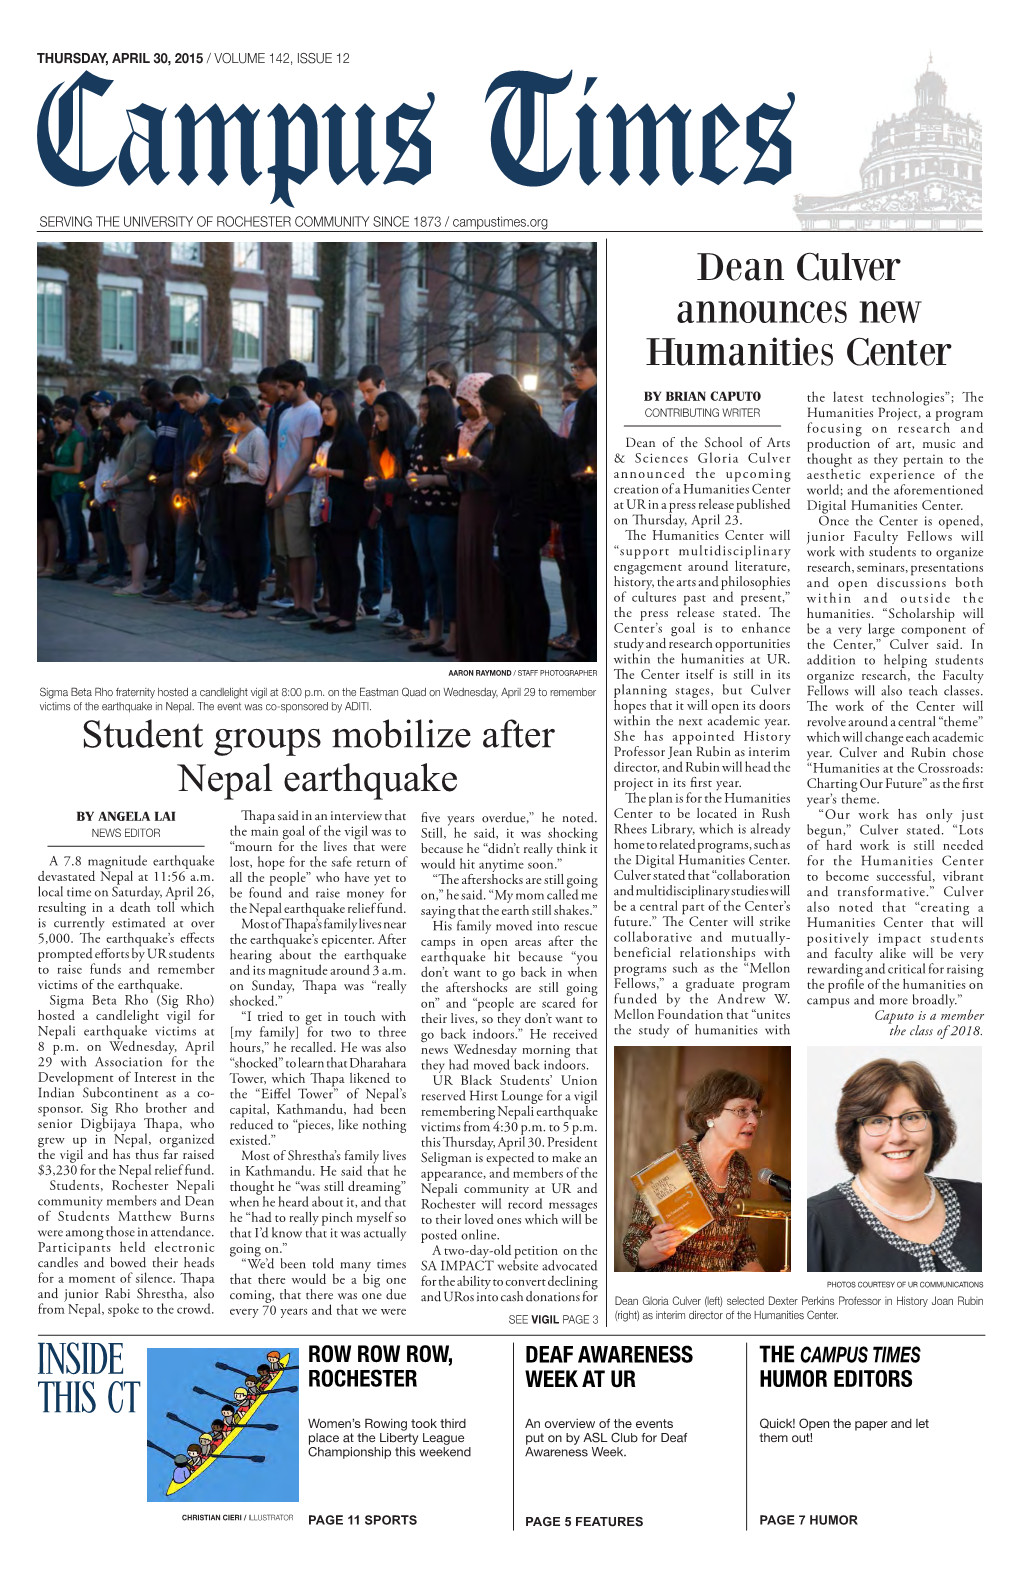 Student Groups Mobilize After Nepal Earthquake